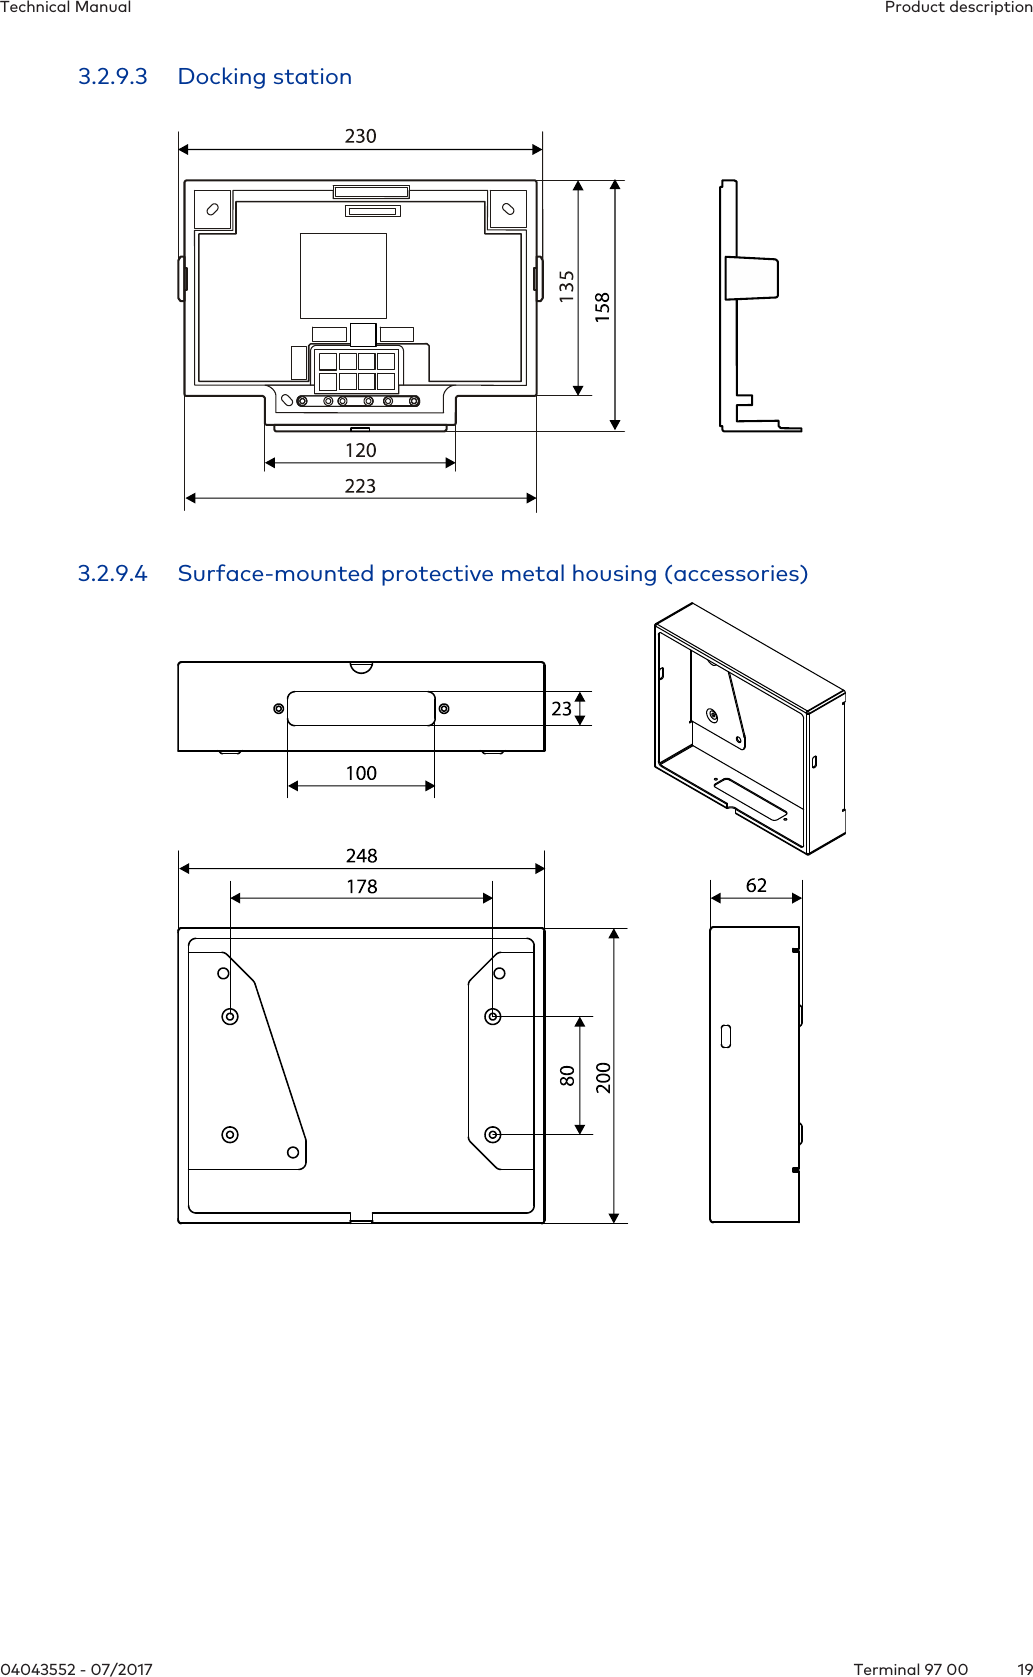 Product descriptionTechnical Manual1904043552 - 07/2017 Terminal 97 003.2.9.3 Docking station3.2.9.4 Surface-mounted protective metal housing (accessories)